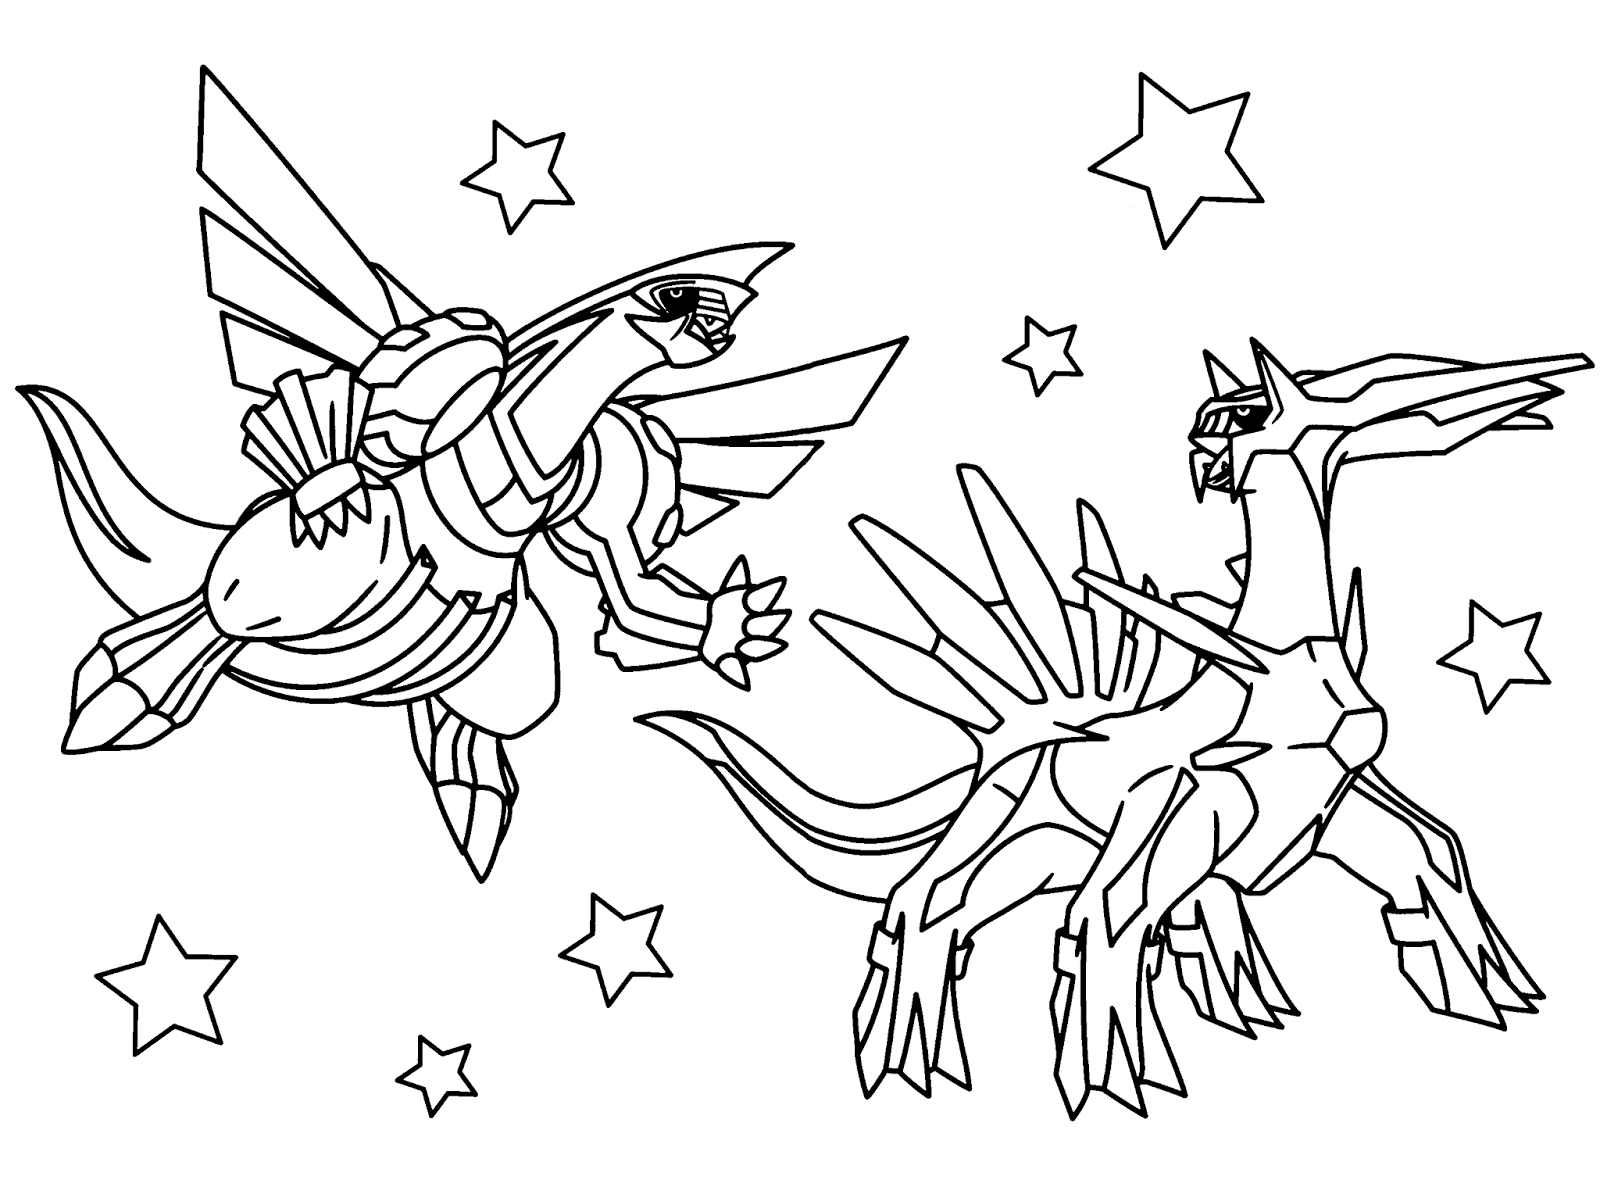 Legendary Pokemon Coloring Pages Dialga And Palkia Coloring4free Coloring4free Com